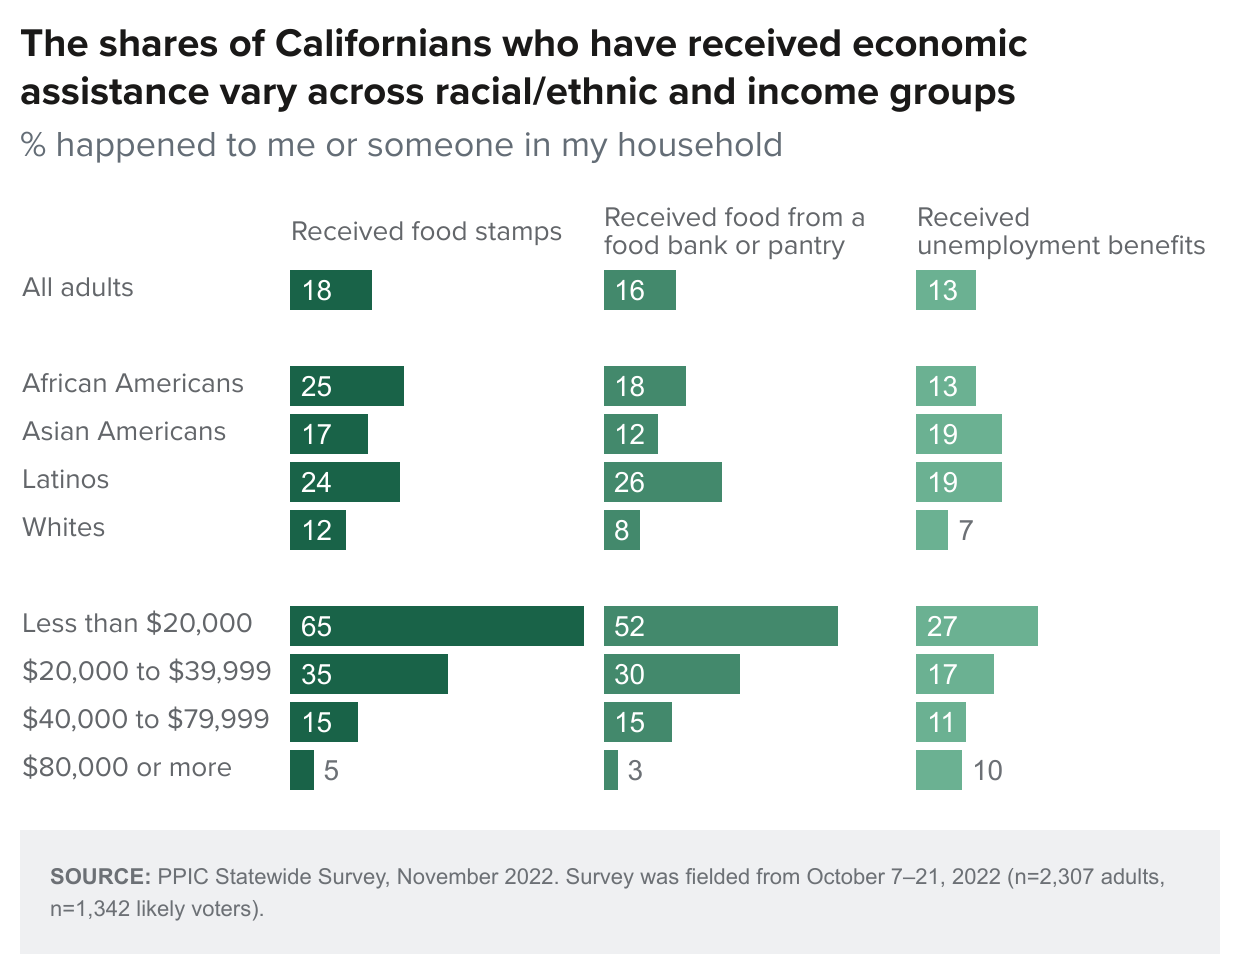 figure - The shares of Californians who have received economic assistance vary across racial/ethnic and income groups